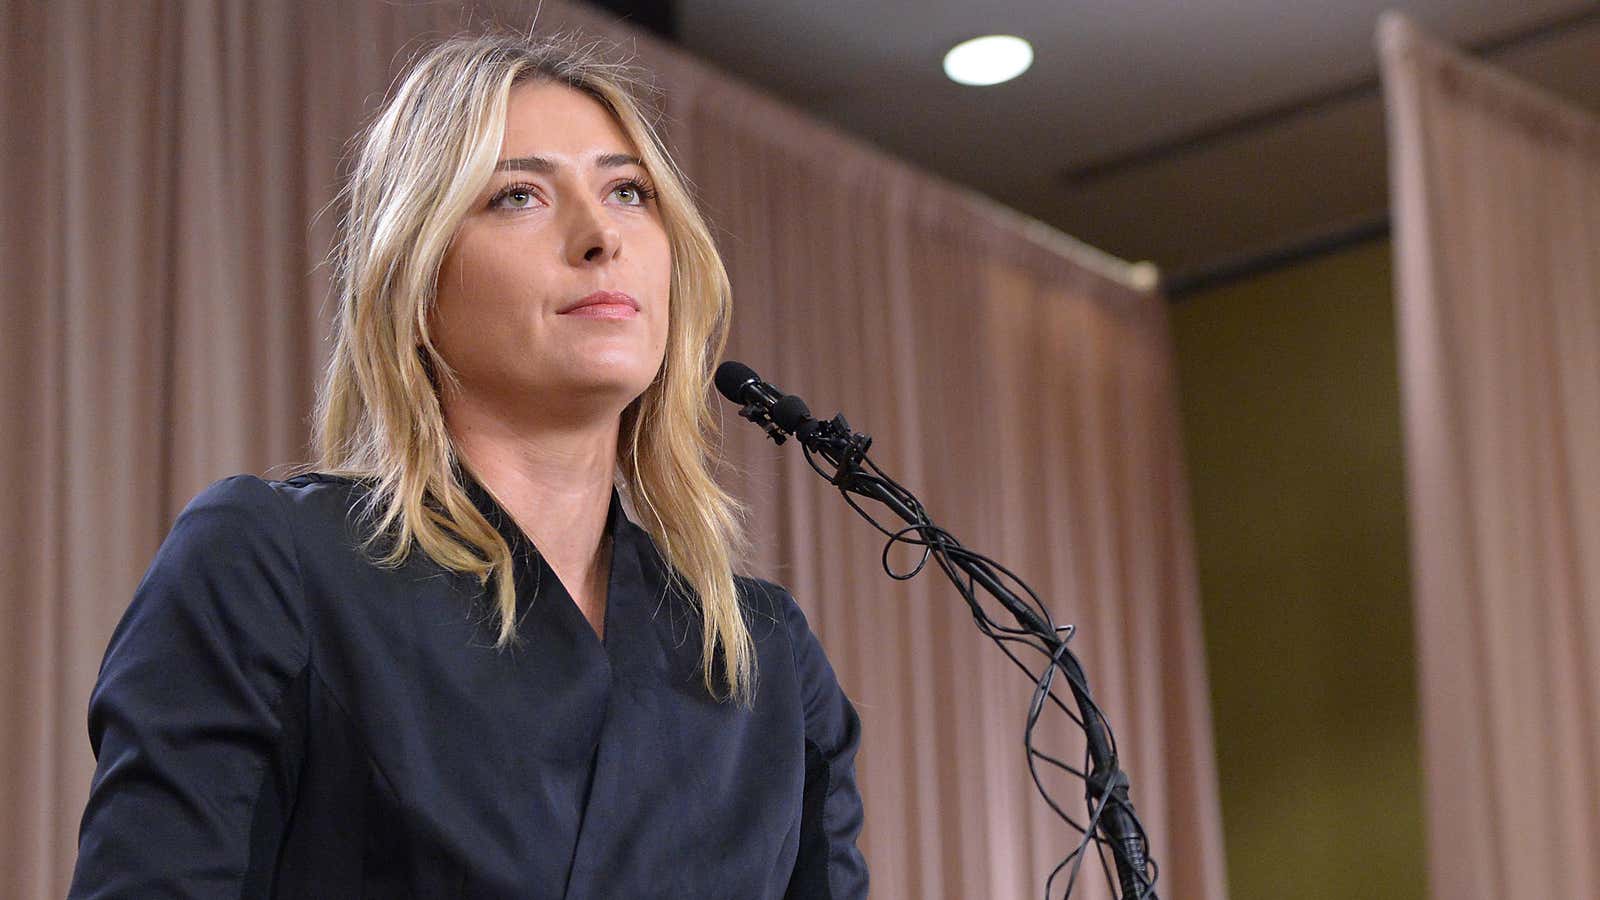 Brands are already distancing themselves from Maria Sharapova.